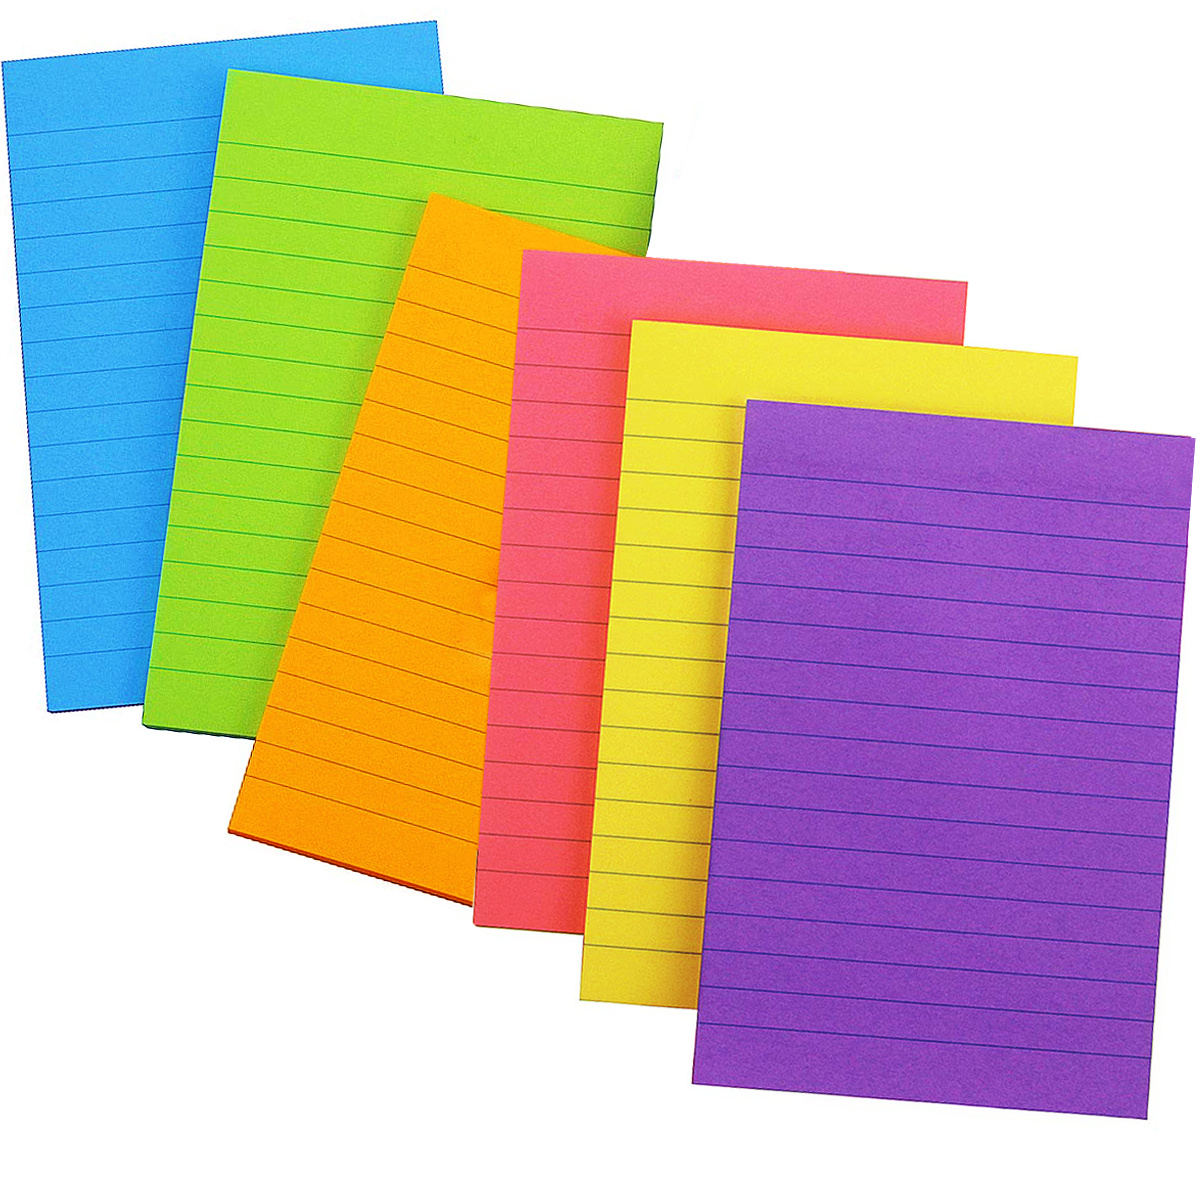 Post-it Autocollants petite taille 15 x 50 mm assorties fluo